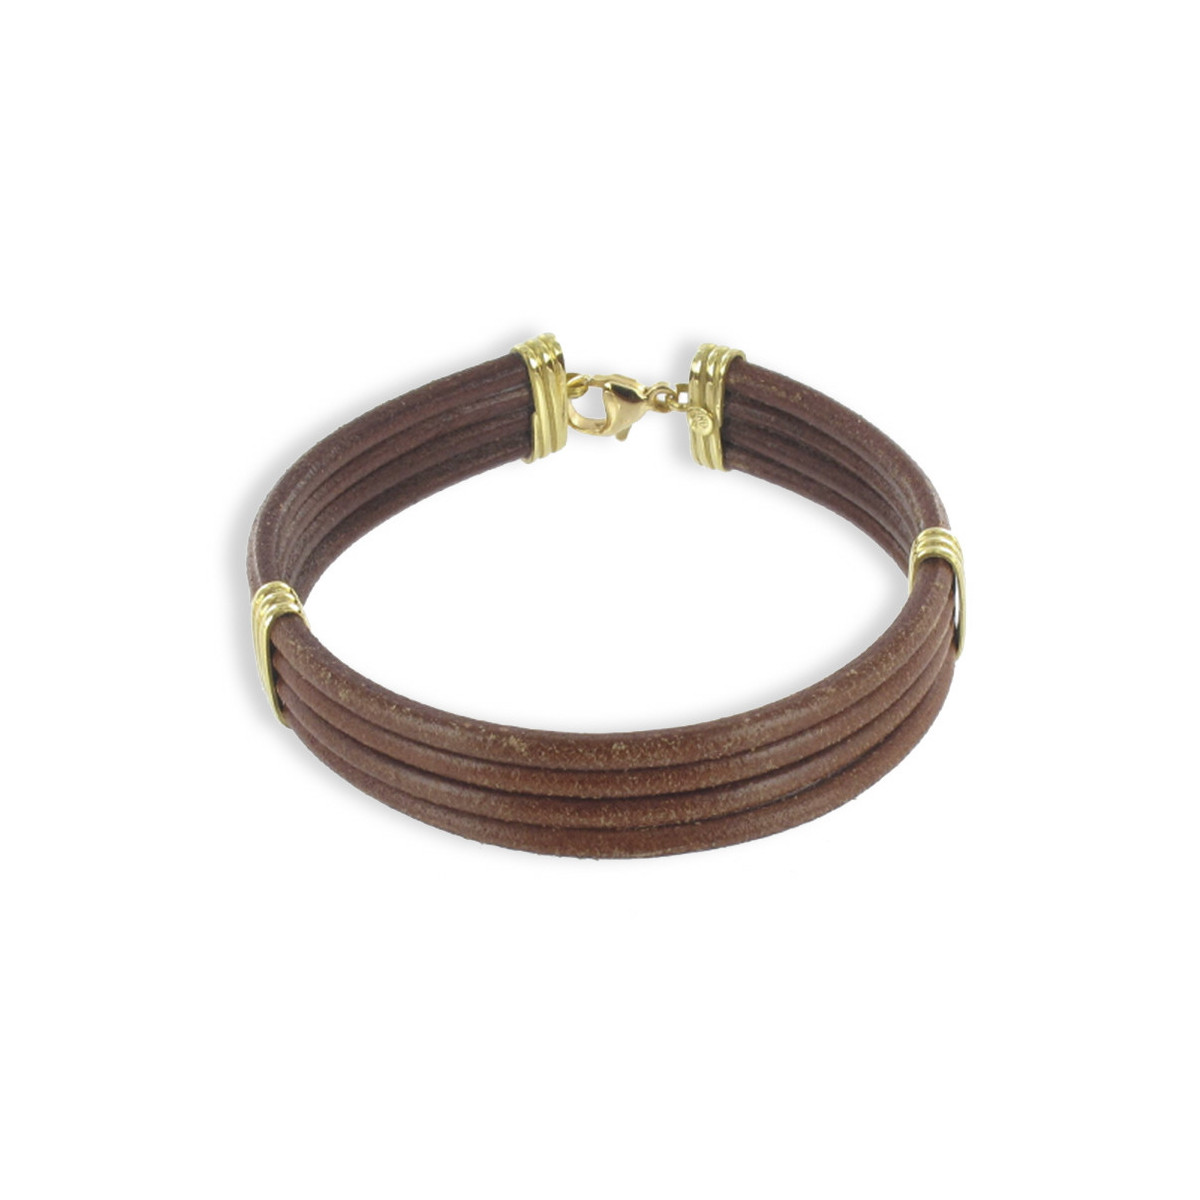 GOLD AND LEATHER BRACELET